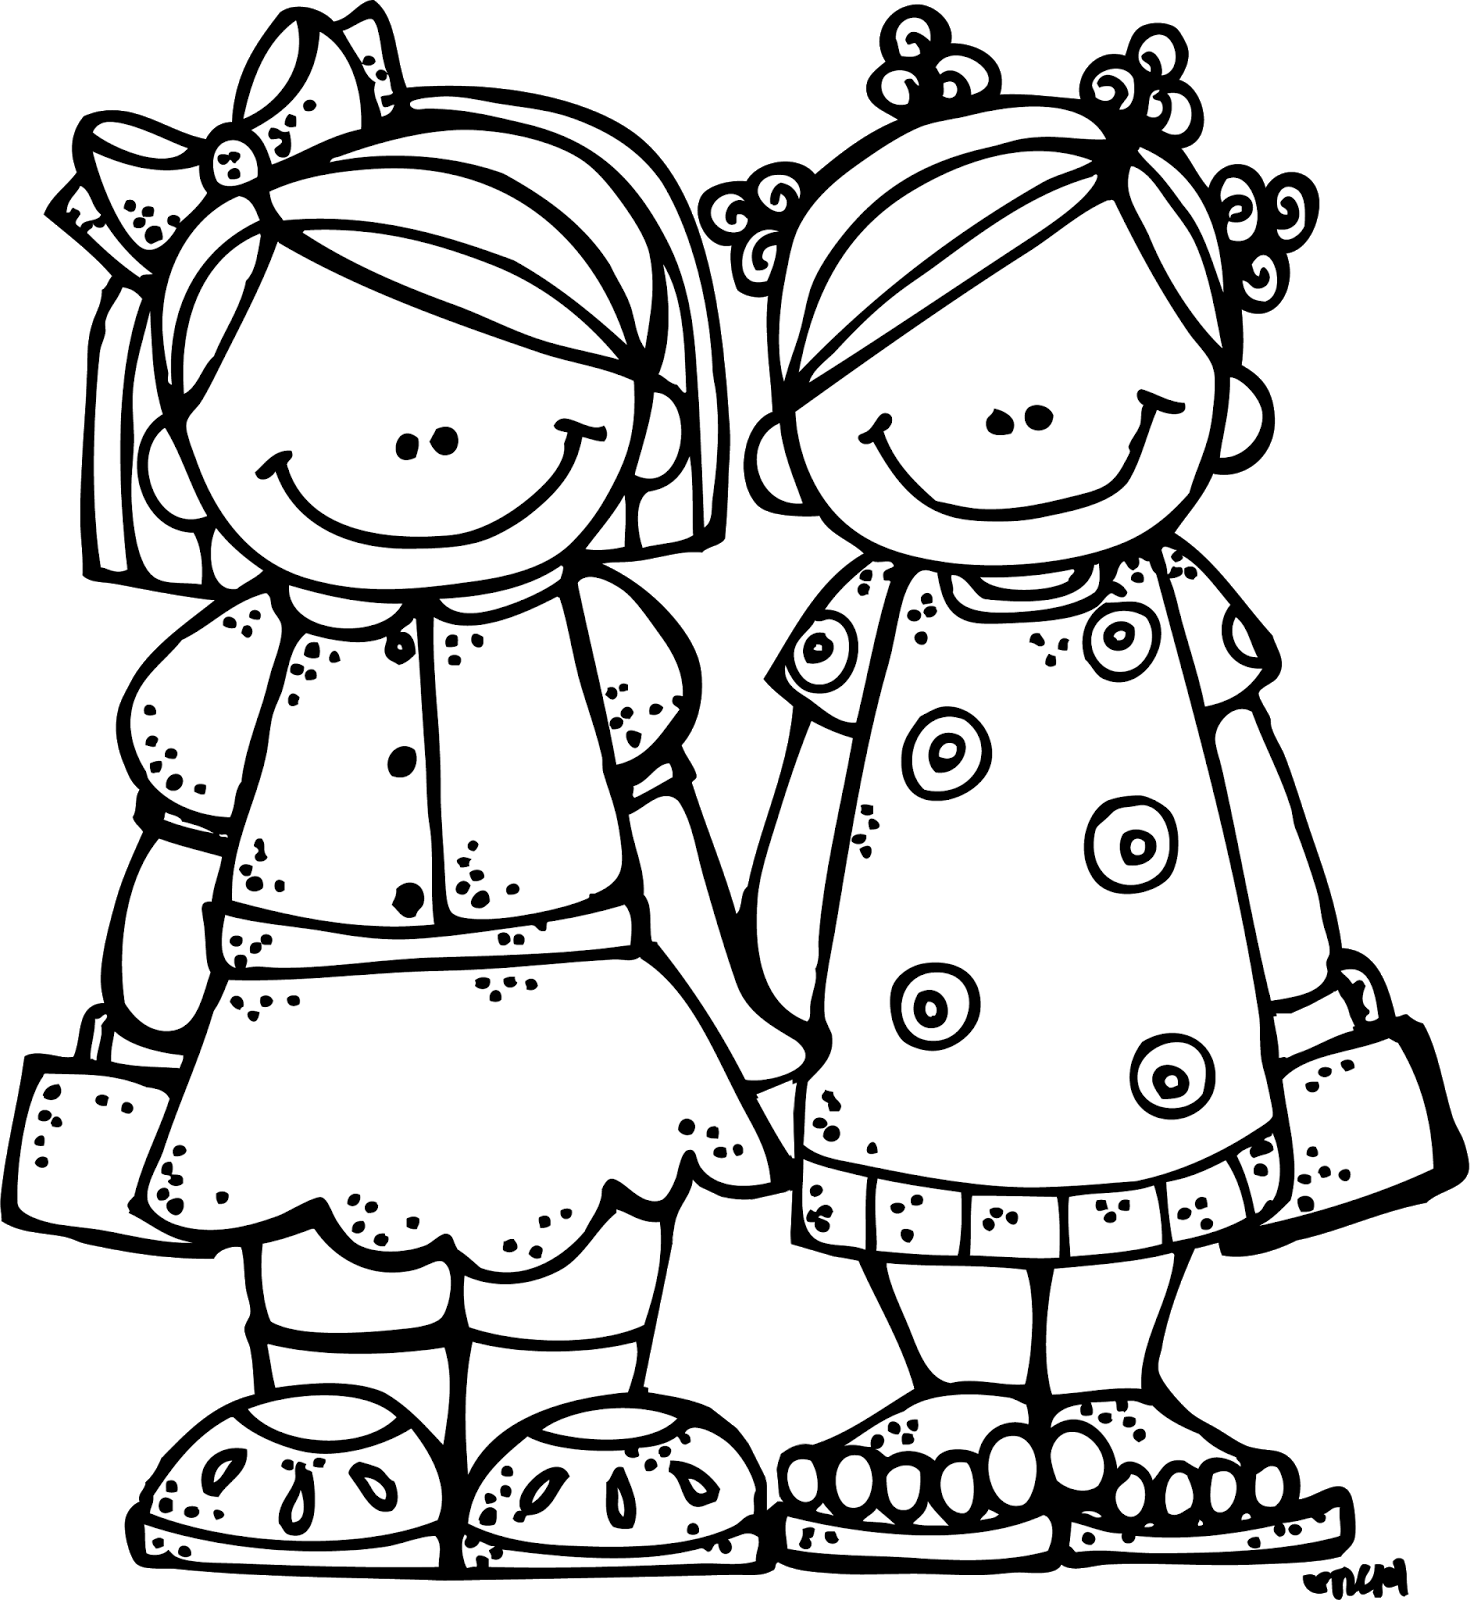 Toddler clipart black and white.  collection of best